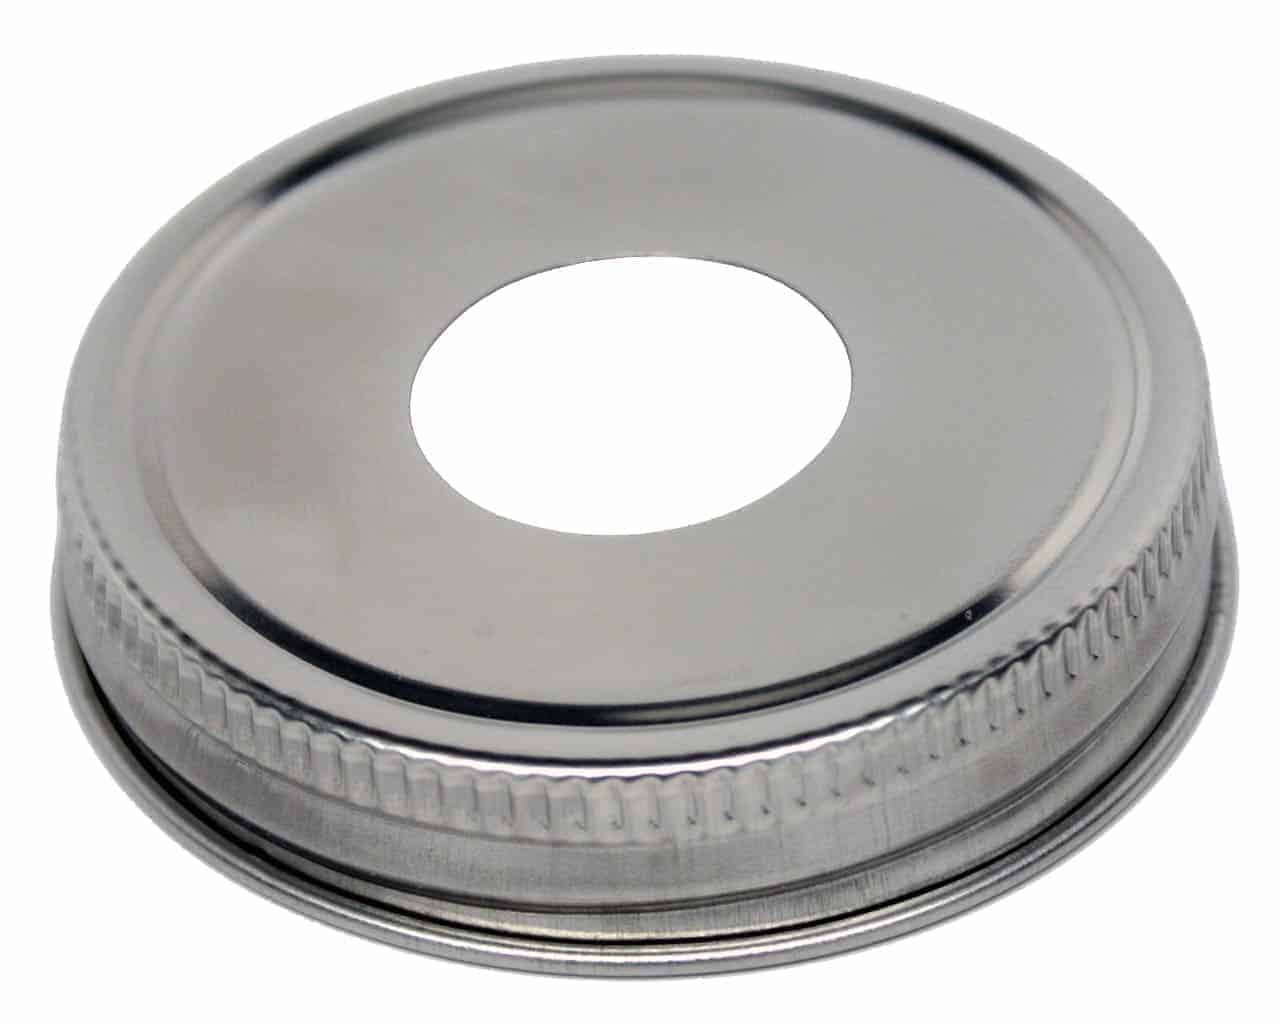 Stainless steel soap pump lid adapter for regular mouth Mason jars